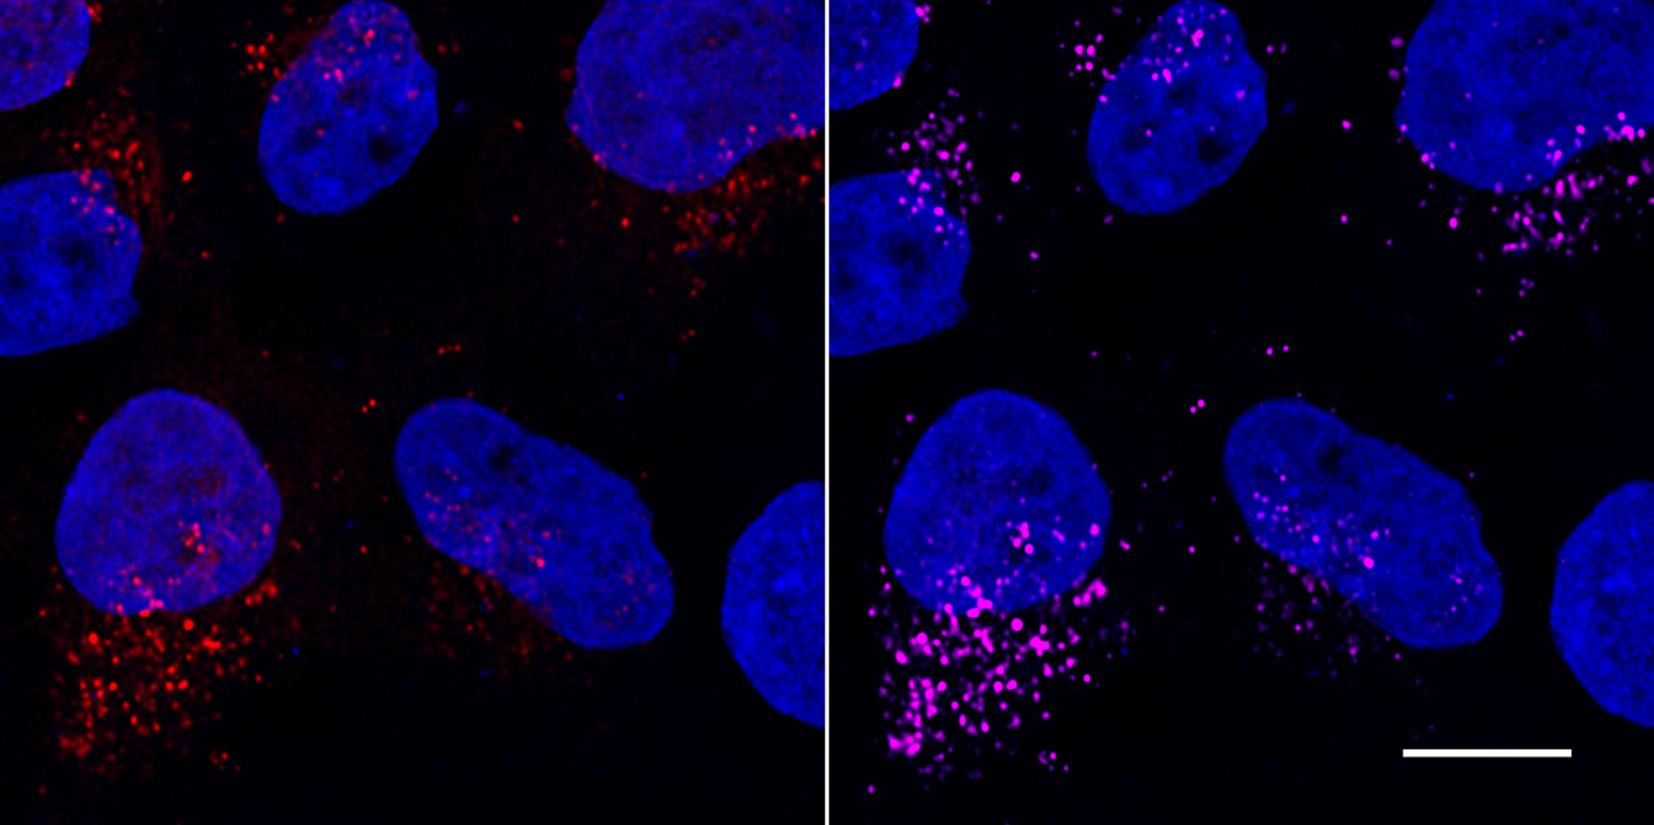 Confocal images of HeLa cells transiently transfected with LC3B-mCherry (red) and immunostained with RFP-Booster Alexa Fluor647 (magenta). Nuclei were stained with DAPI (blue). Scale bar, 10 μm. Images were recorded at the Core Facility Bioimaging at the Biomedical Center, LMU Munich.